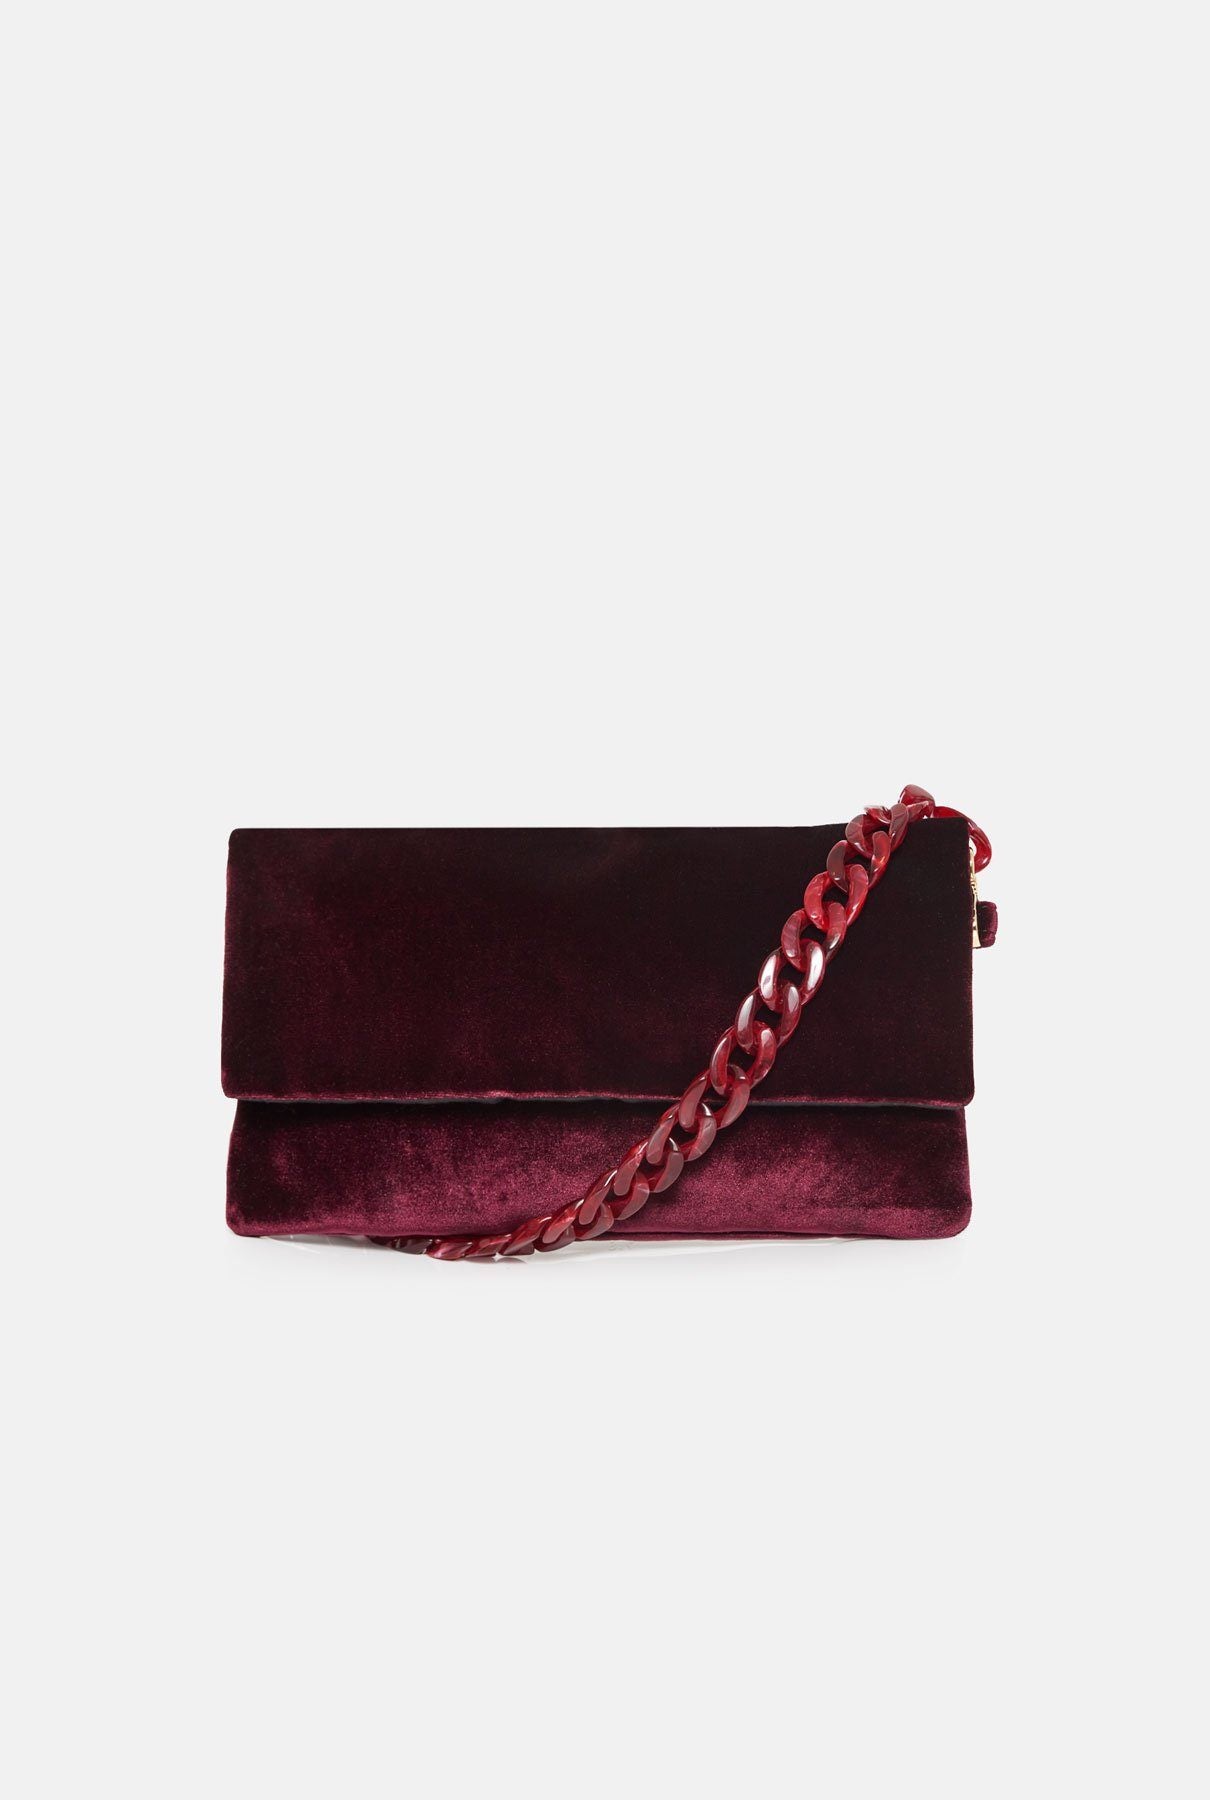 Backpack Purse Bag Velvet with coin Purse Burgundy By Candies : Amazon.in:  Fashion